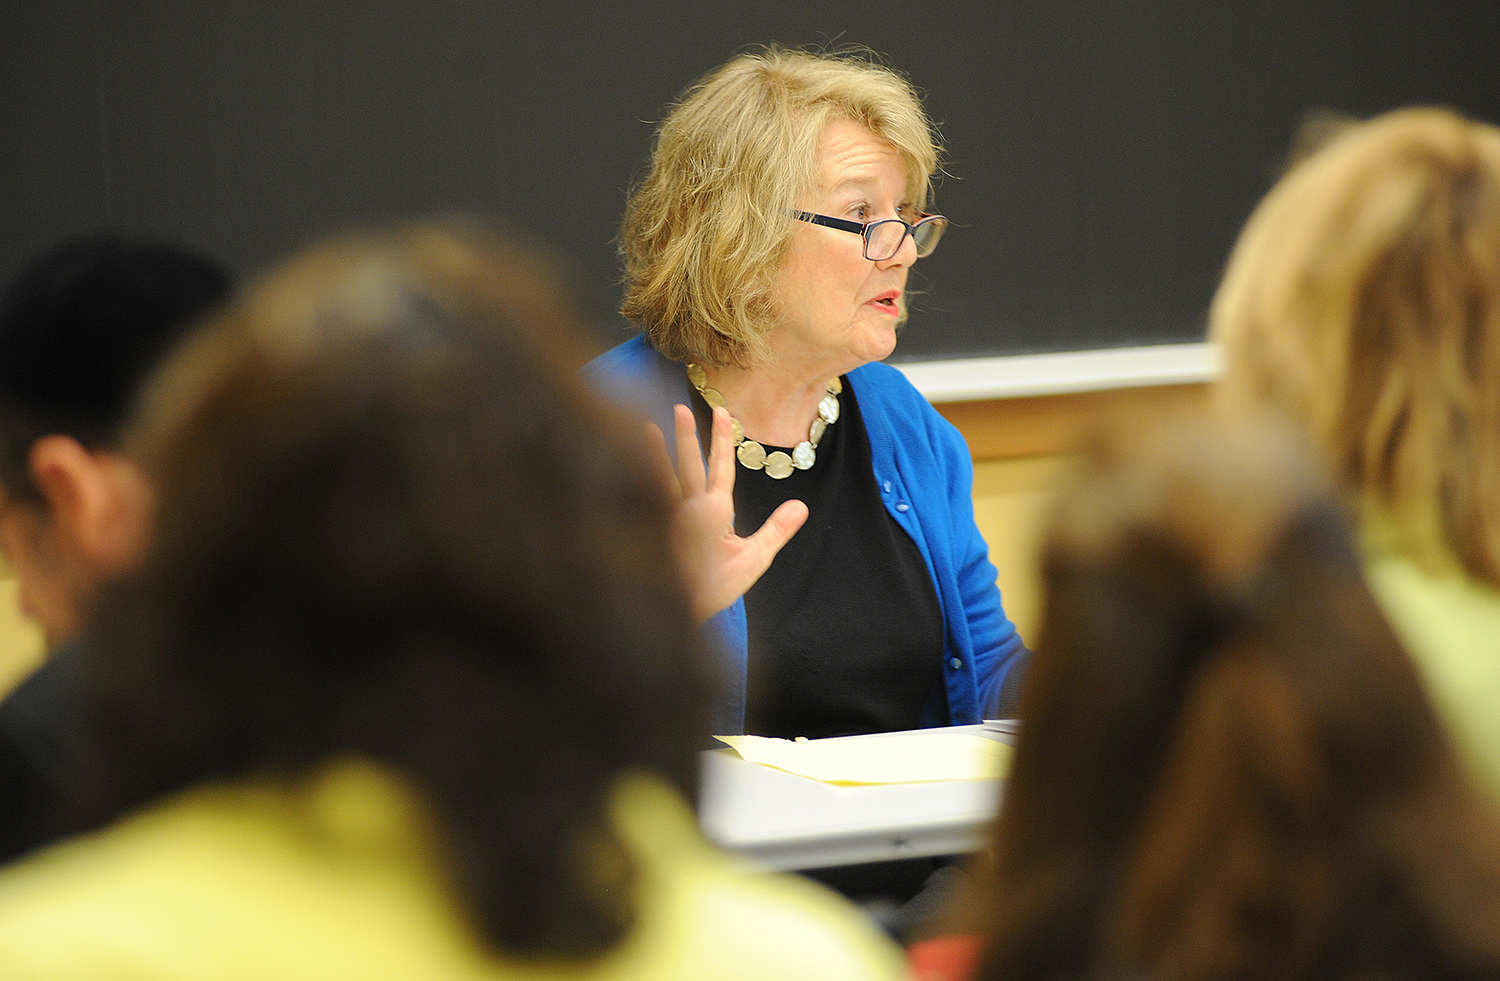 Guest faculty member Lis Harris, a journalist and author, spoke about literary journalism and memoir. Harris was a staff worker on The New Yorker for 25 years, and her work has appeared in The New York Times, The World Policy Journal, and the Wilson Quarterly.